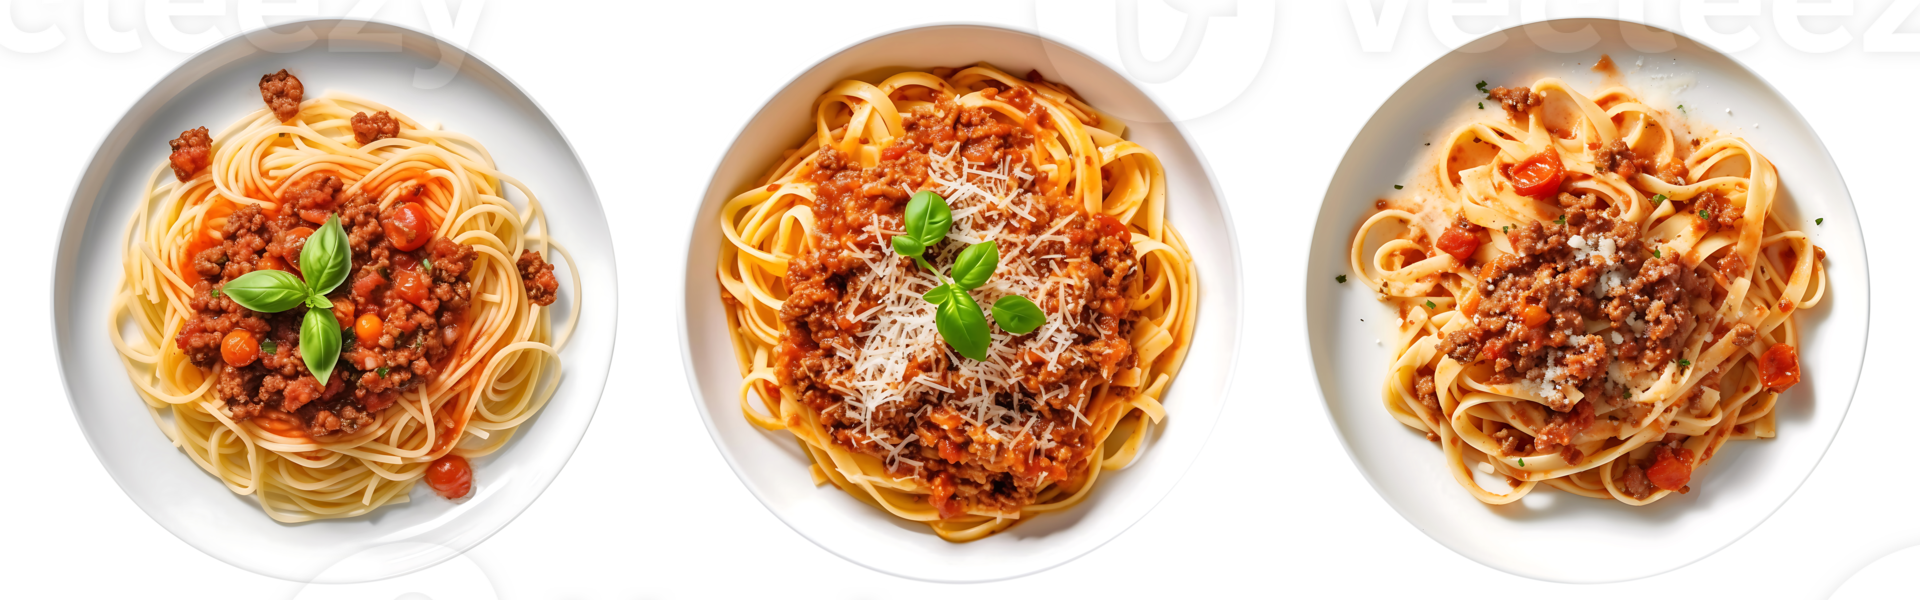 Pasta spaghetti bolognese on white bowl, top view with transparent background, Technology png